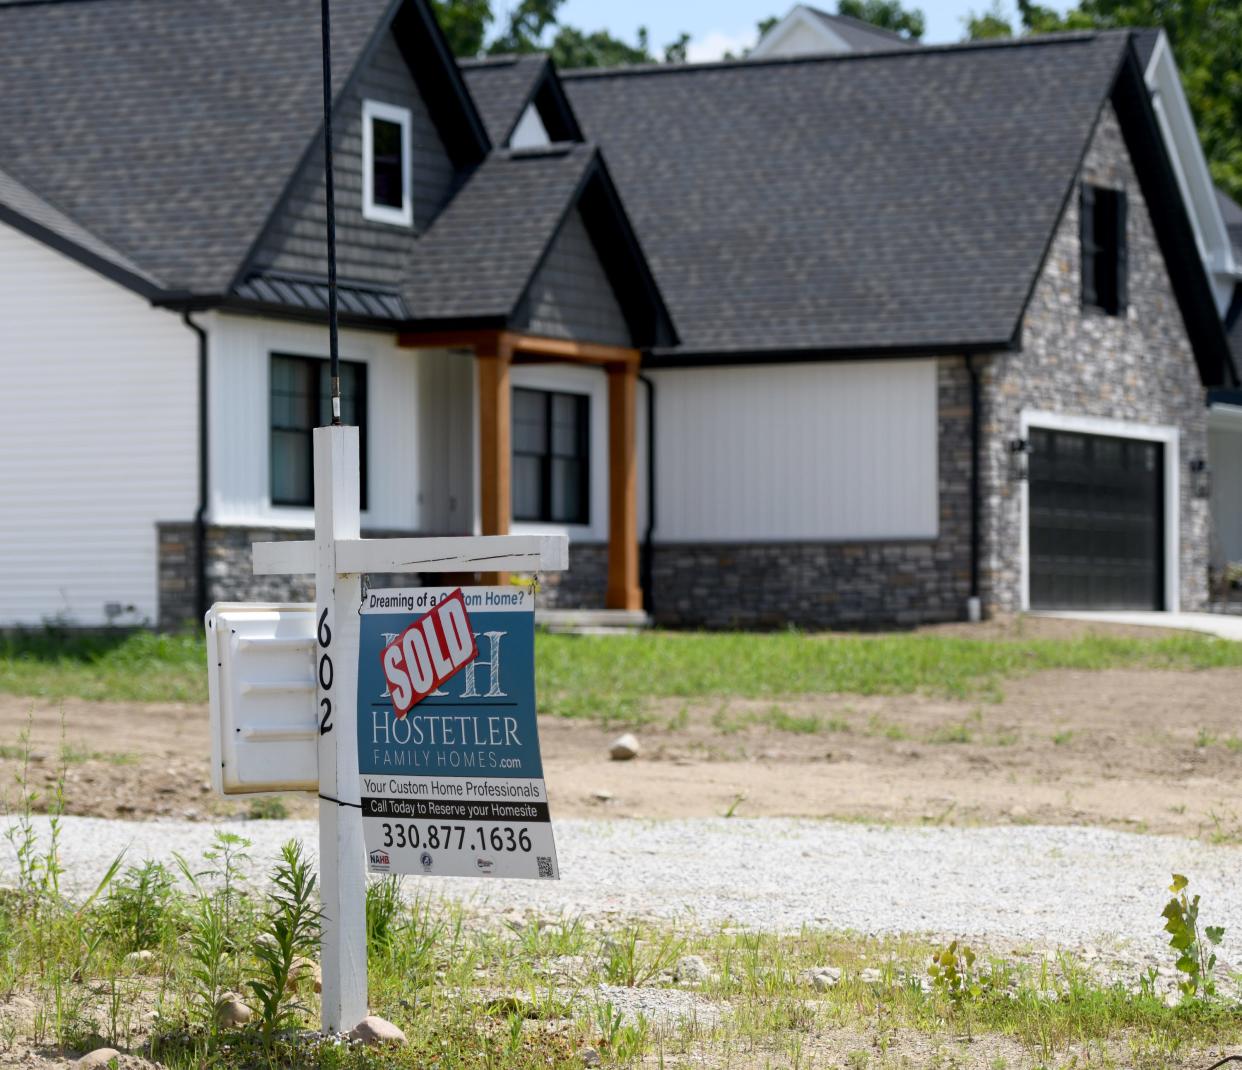 Home values are climbing around Ohio in reappraisals this year, jumping on average 41% in Franklin County and 34% in Summit County. Stark County will undergo a reappraisal in 2024.